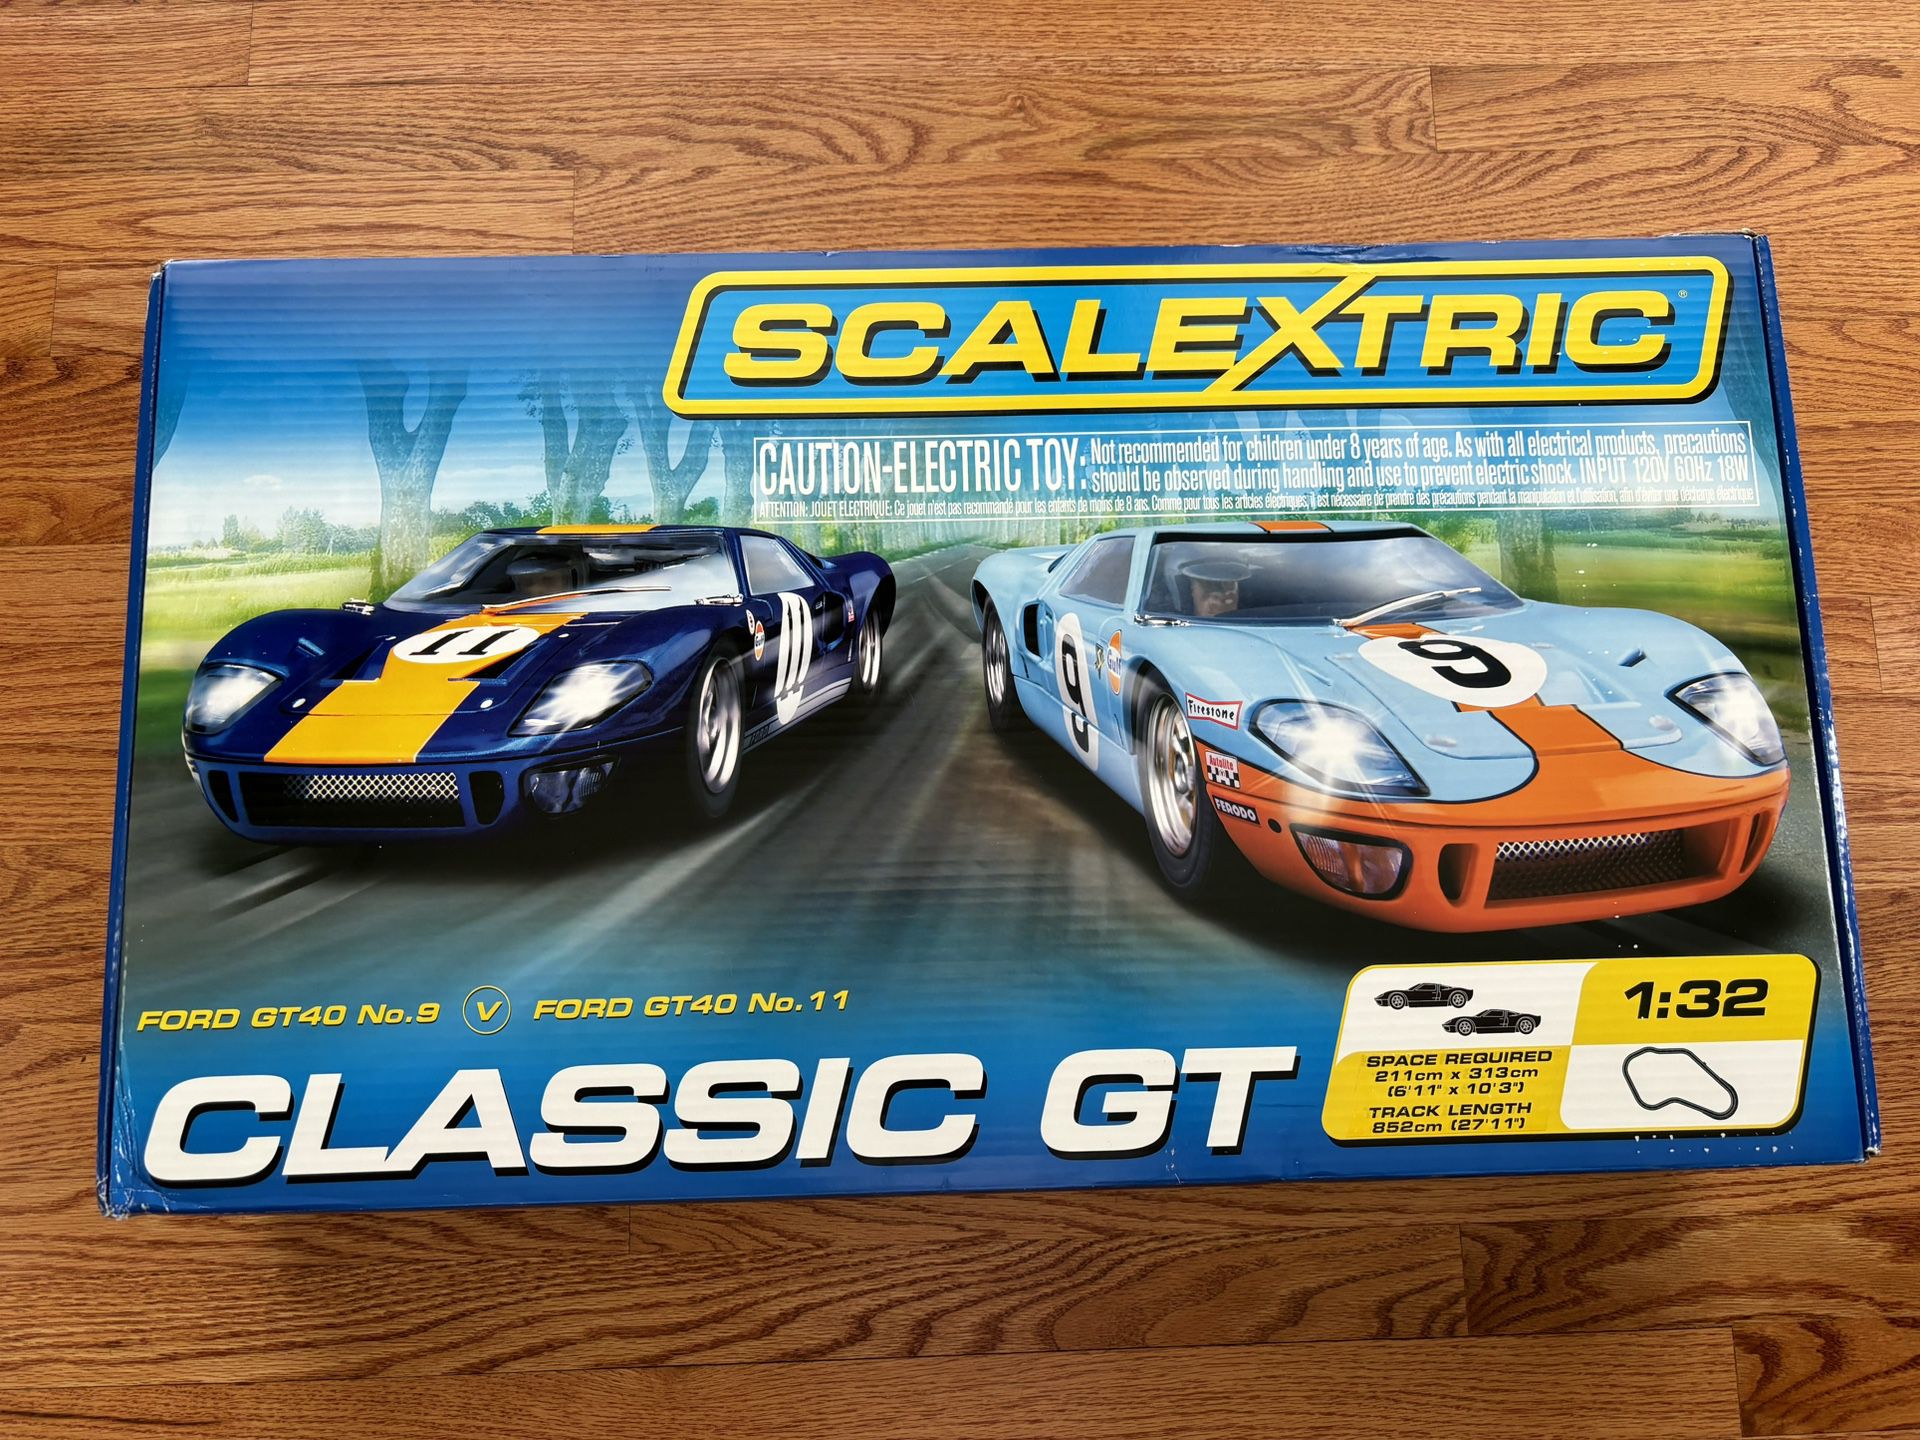 New Scalextric Classic GT Slot Car Track 1:32 